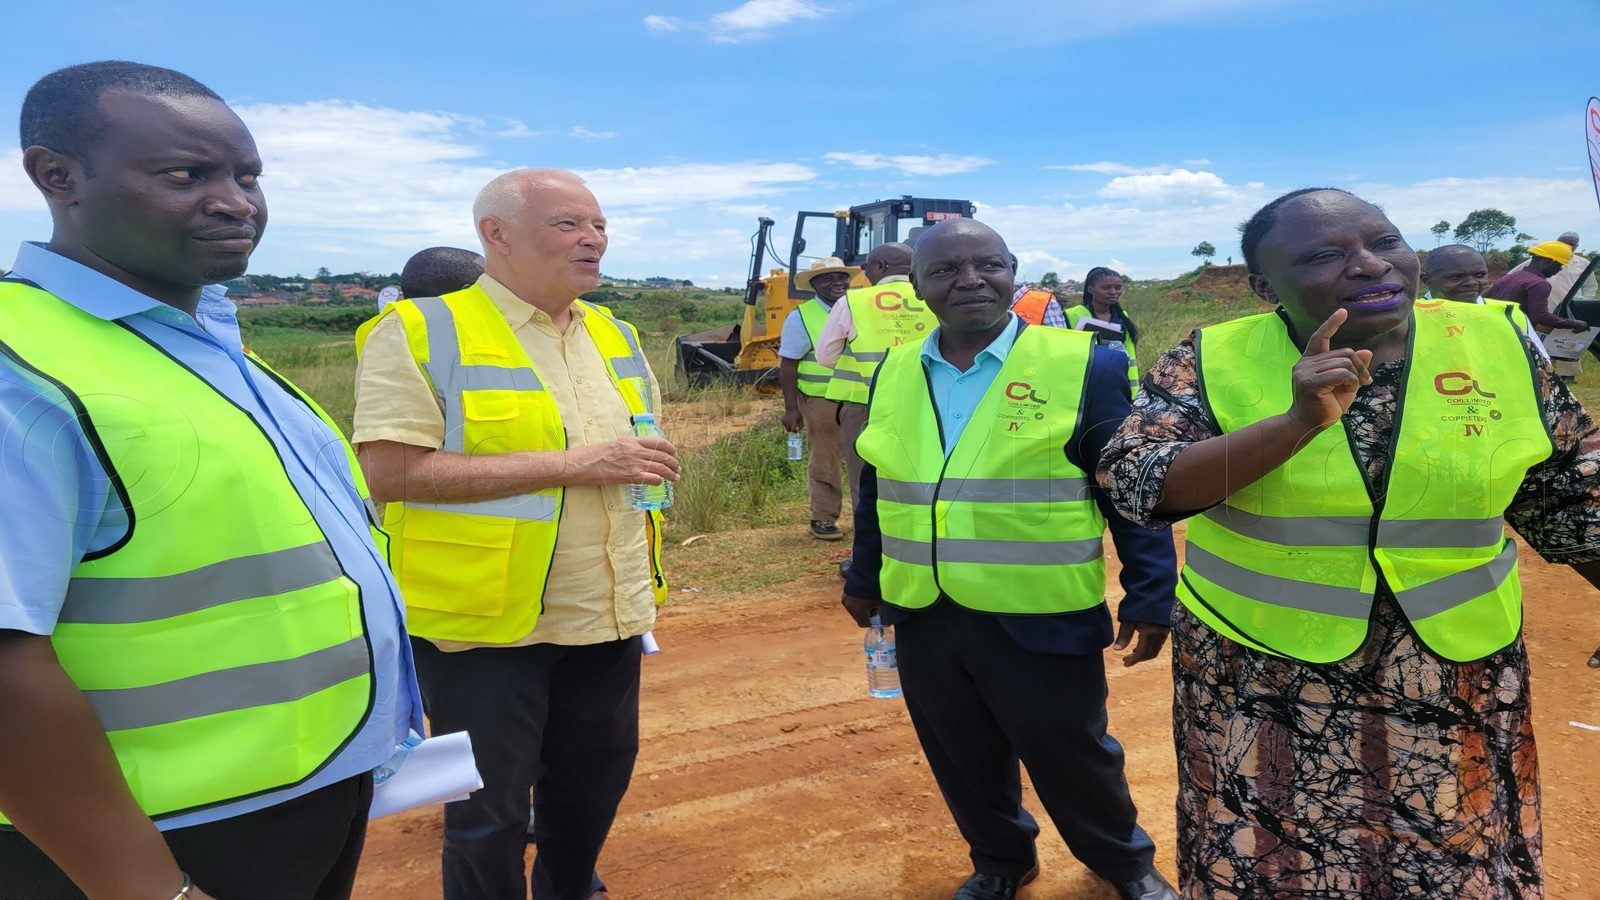 On the right   Rose Mary Tibiwa  the commissioner for  transport services and infrastructure services with the ministry of works and transport during the launch of the first phase of construction of Bukasa port that involves swamp refilling and reclaiming   for the port . On the right is  Apollo  Kashanku the project manager